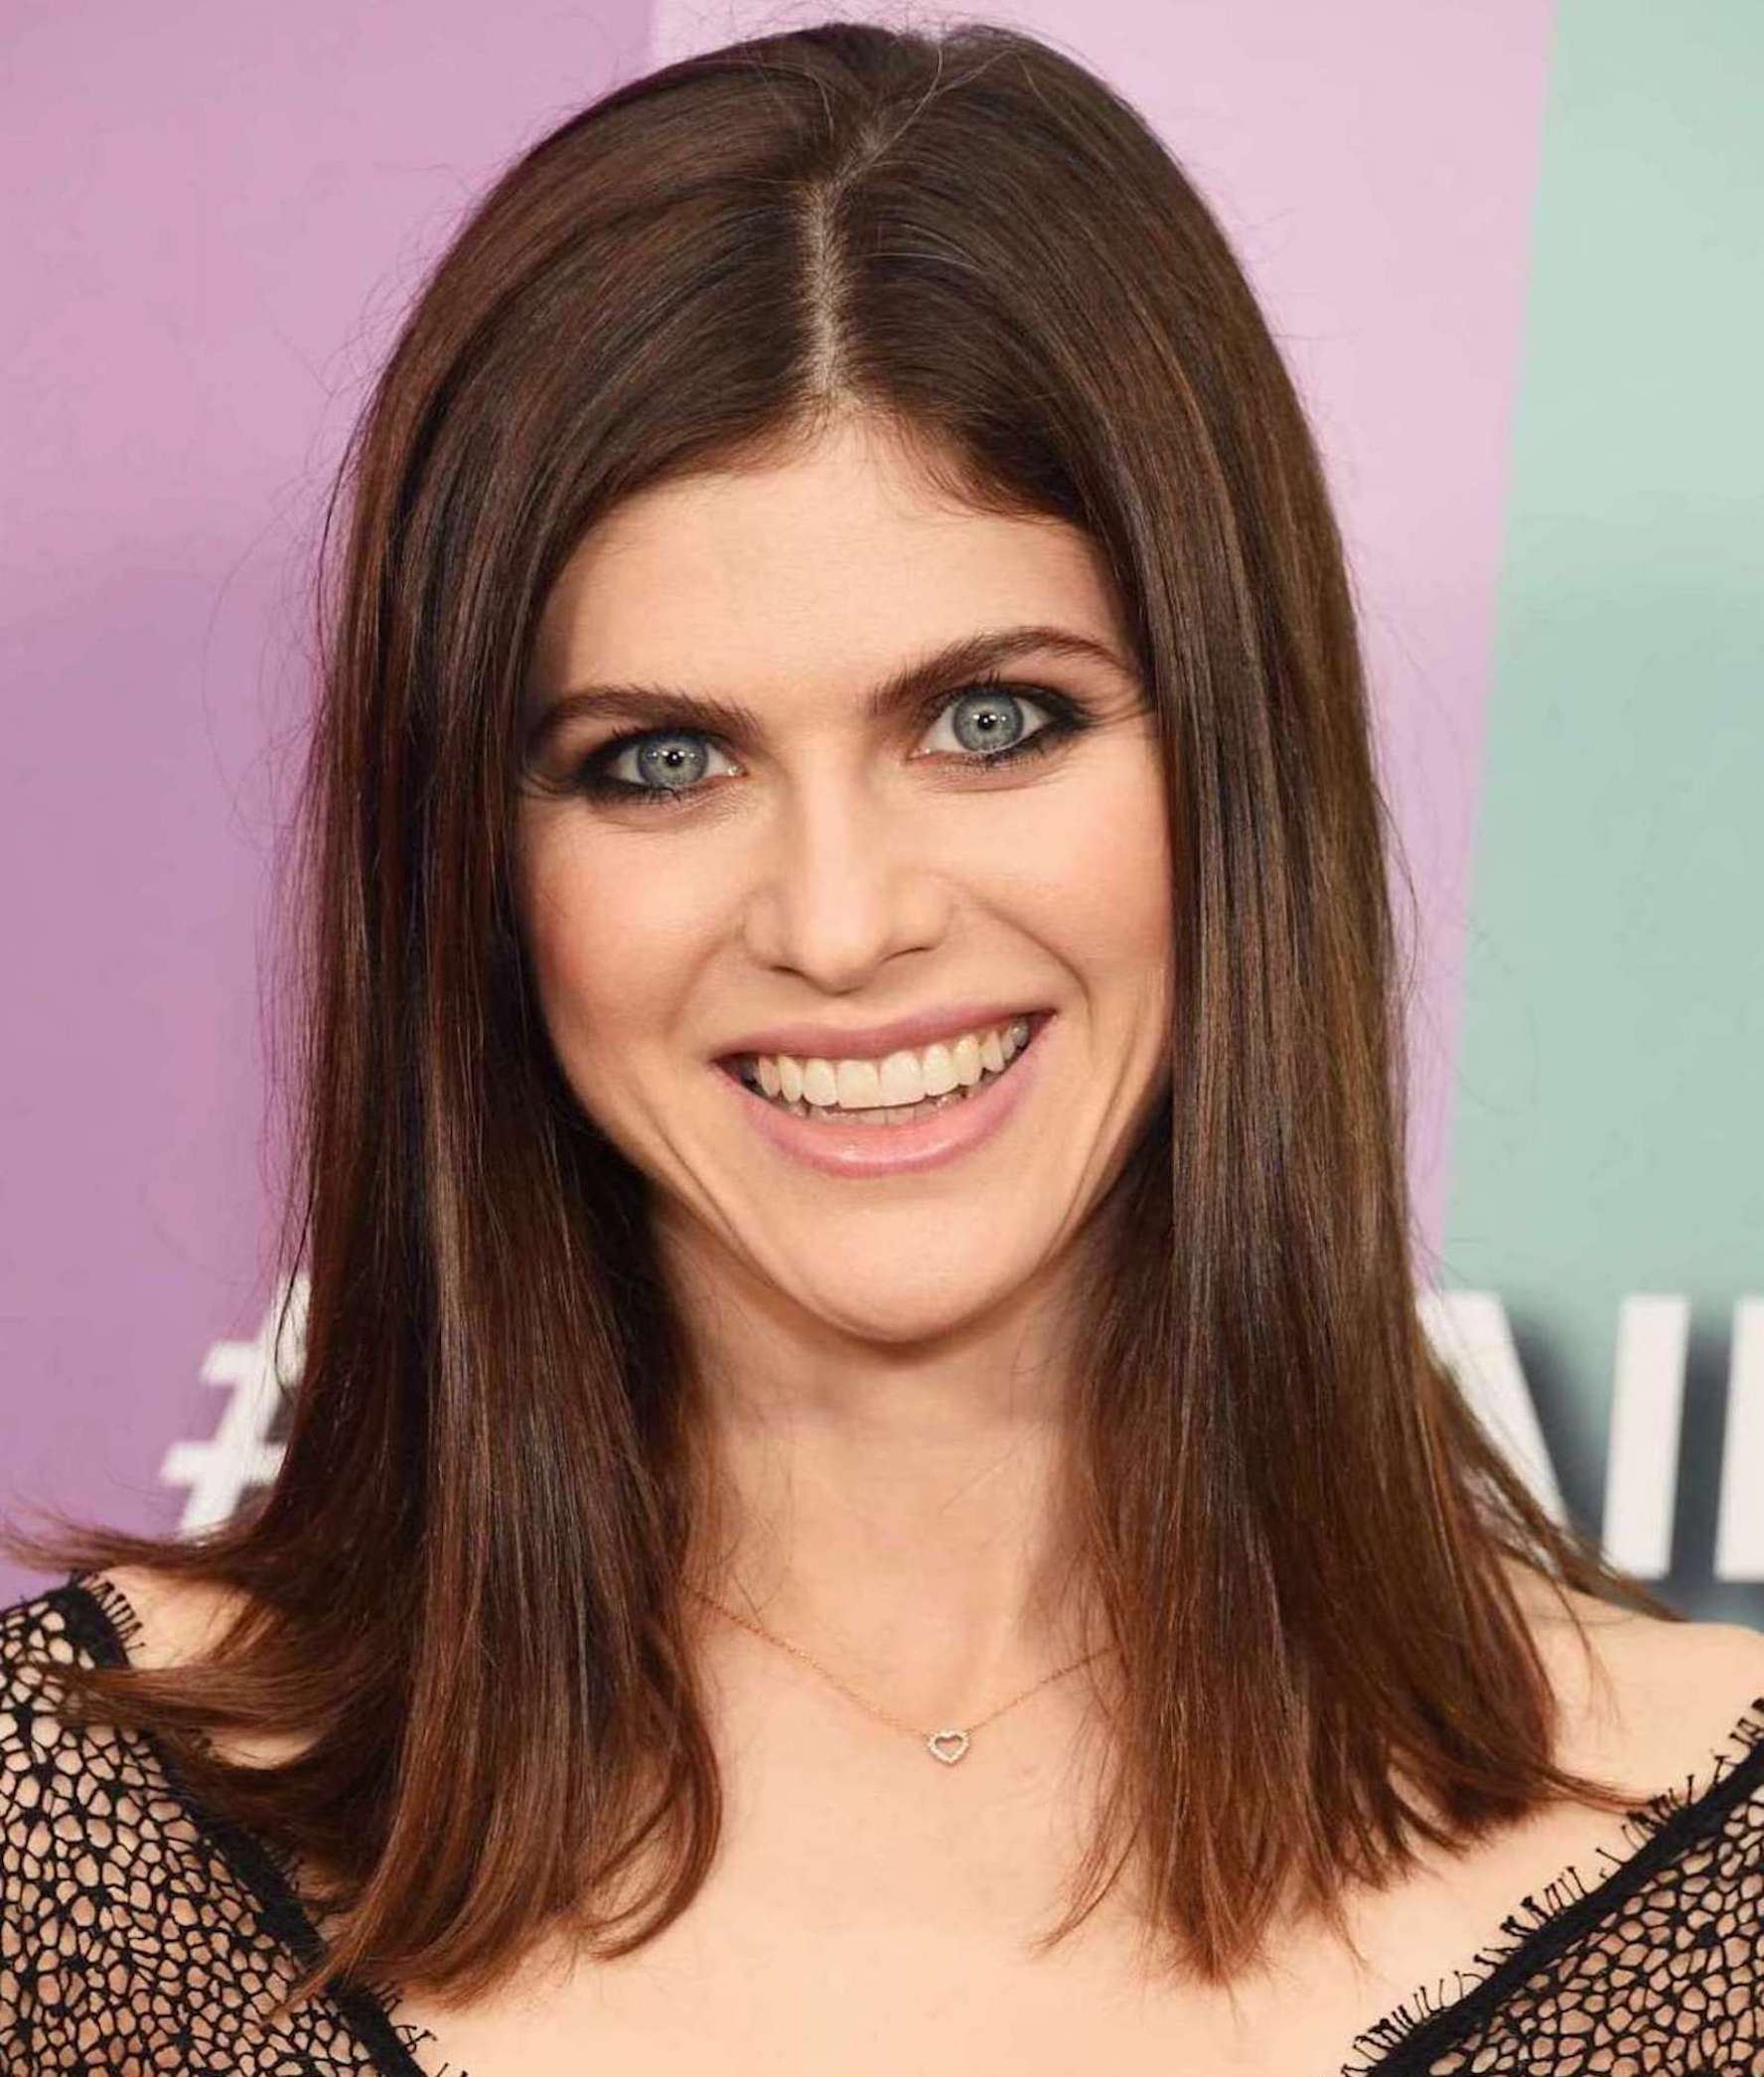 Is Alexandra daddario the GOAT crazy looking woman Sports, Hip Hop.